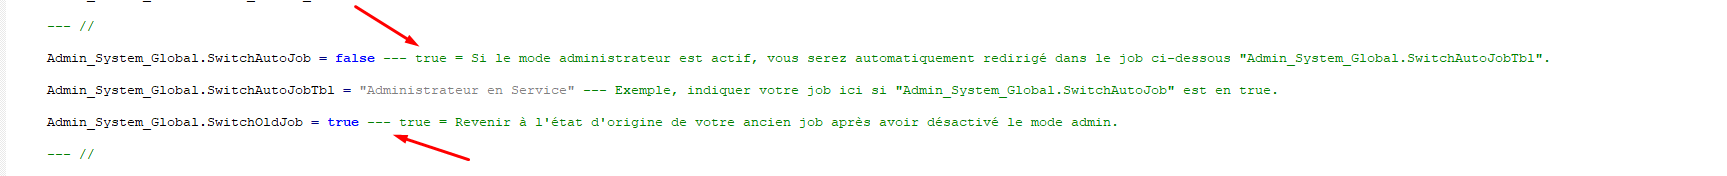 iprdisablejobswith.png